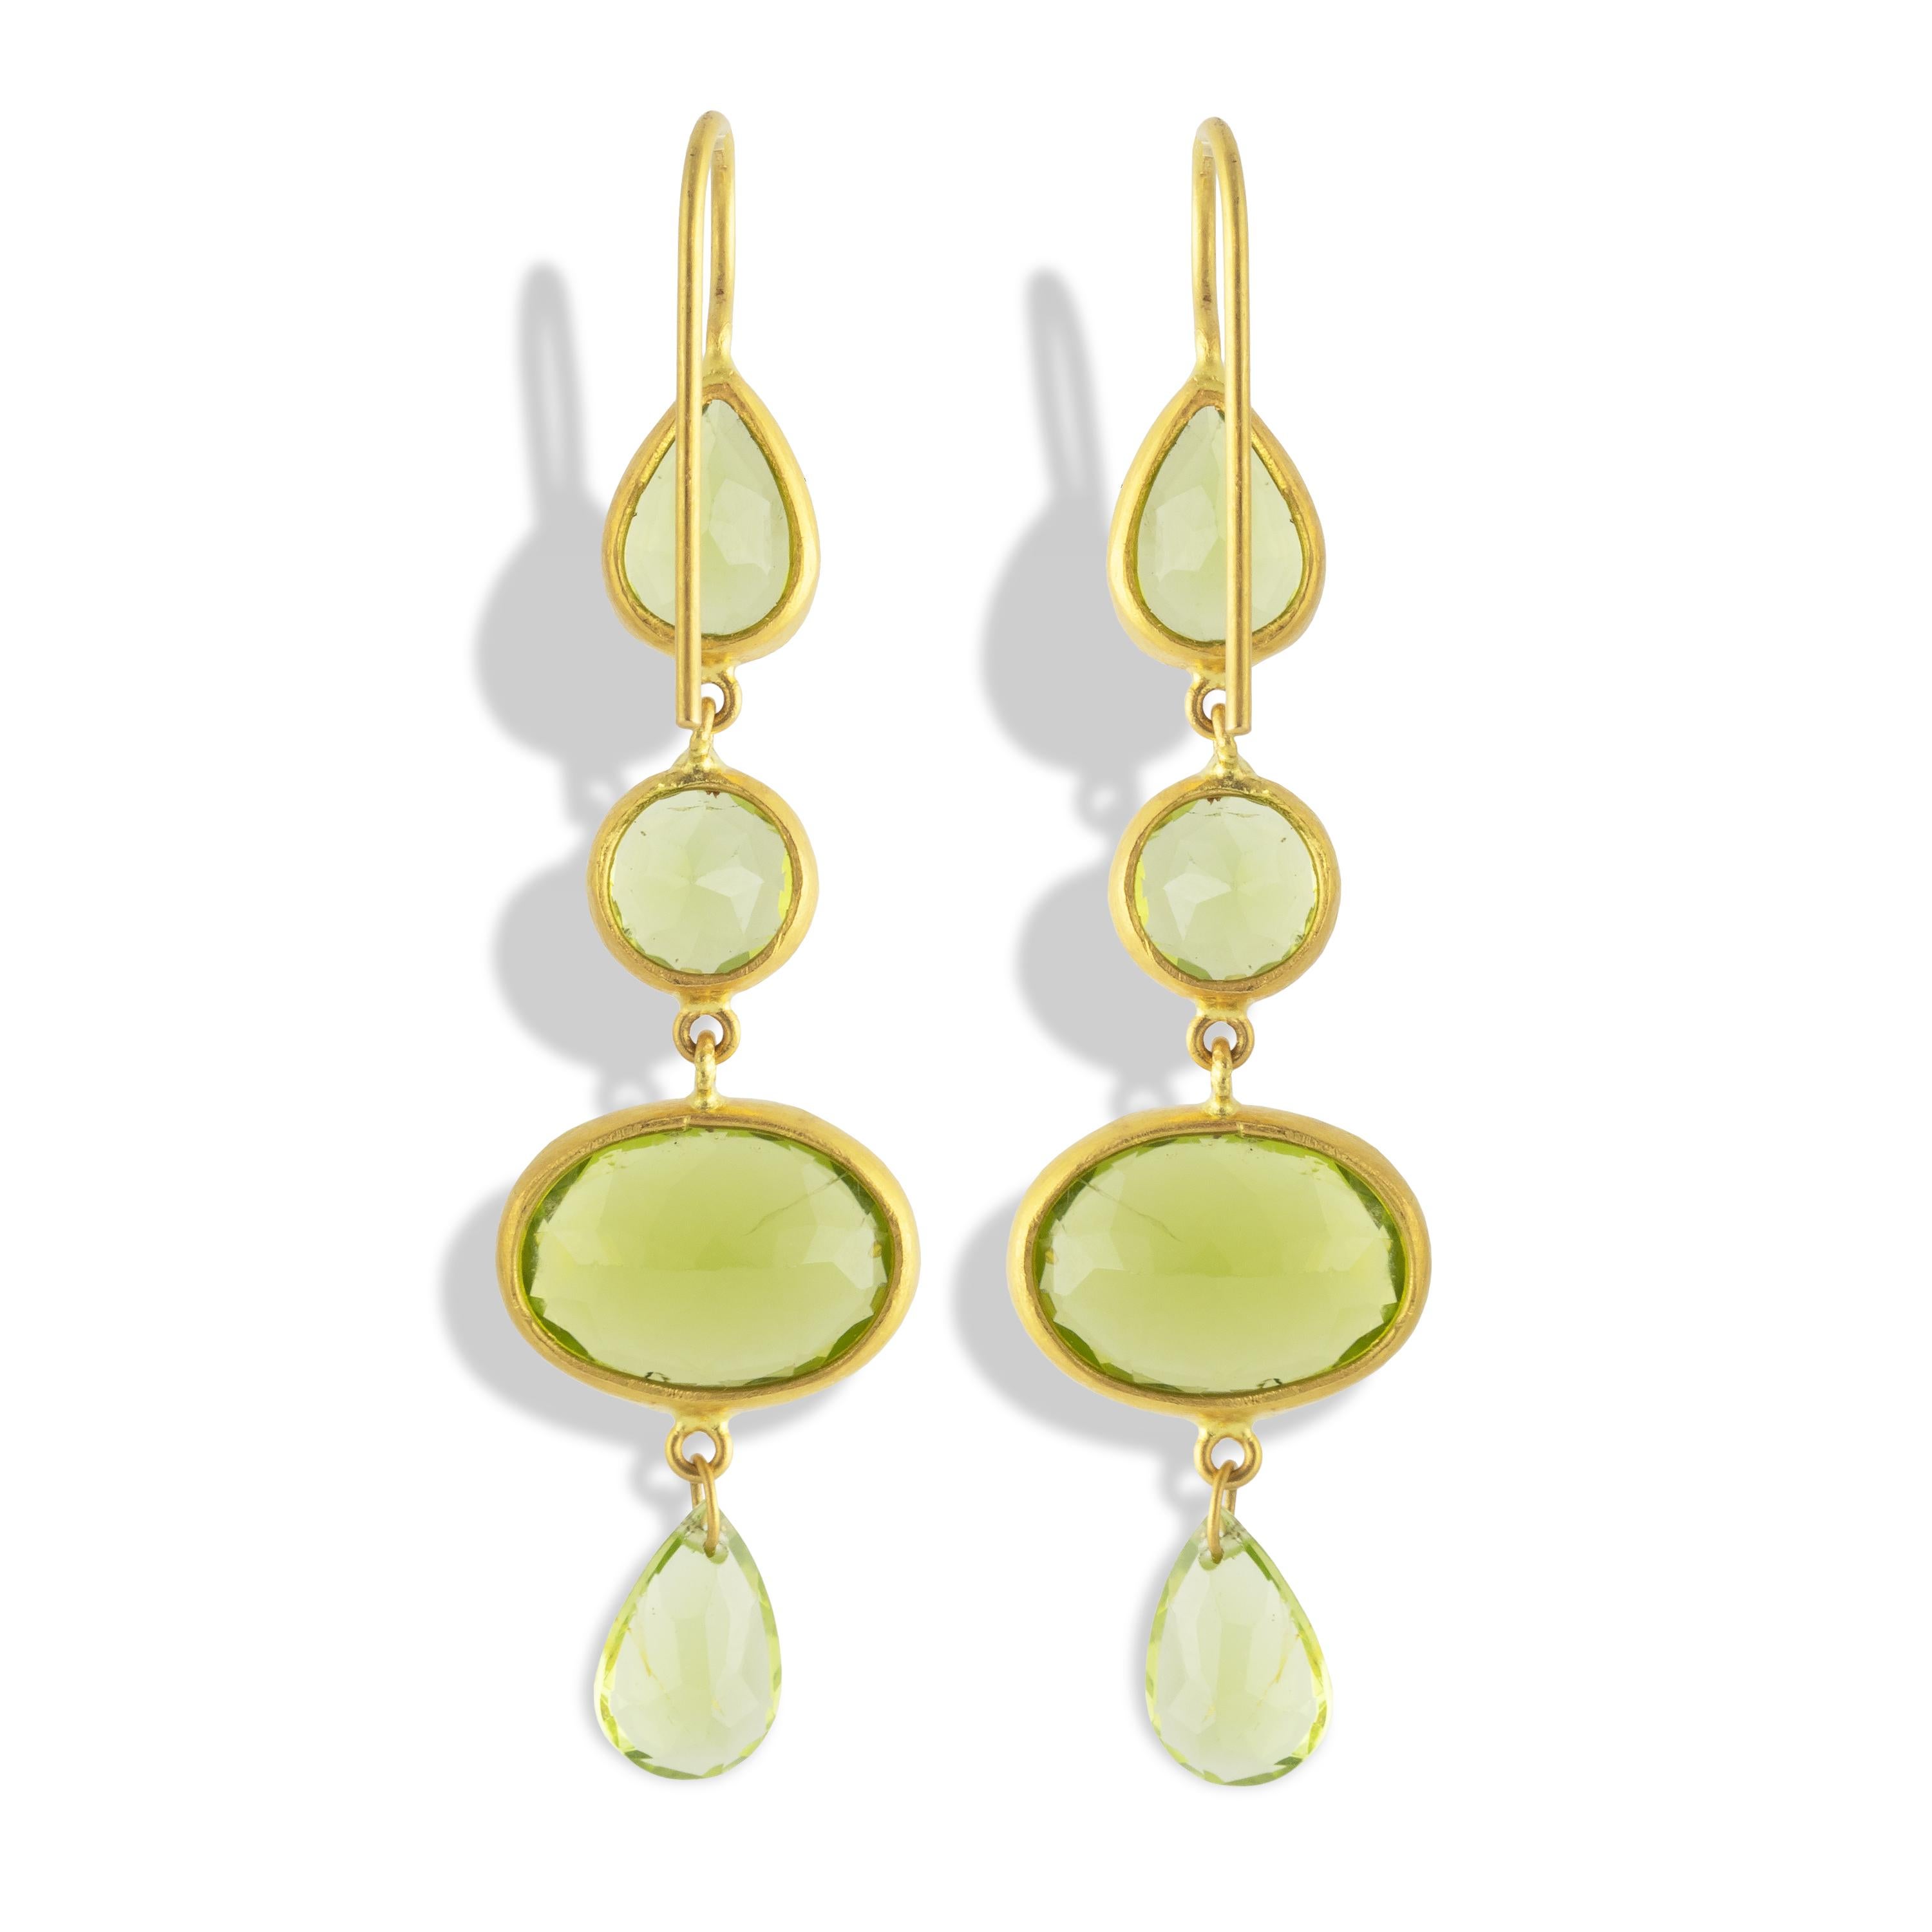 These earrings feature 22.6 carats of stunning Peridot in mixed shapes (ovals, pears, and rounds) sparkle in 22k matte yellow gold.  Measuring 51.5mm (2.02